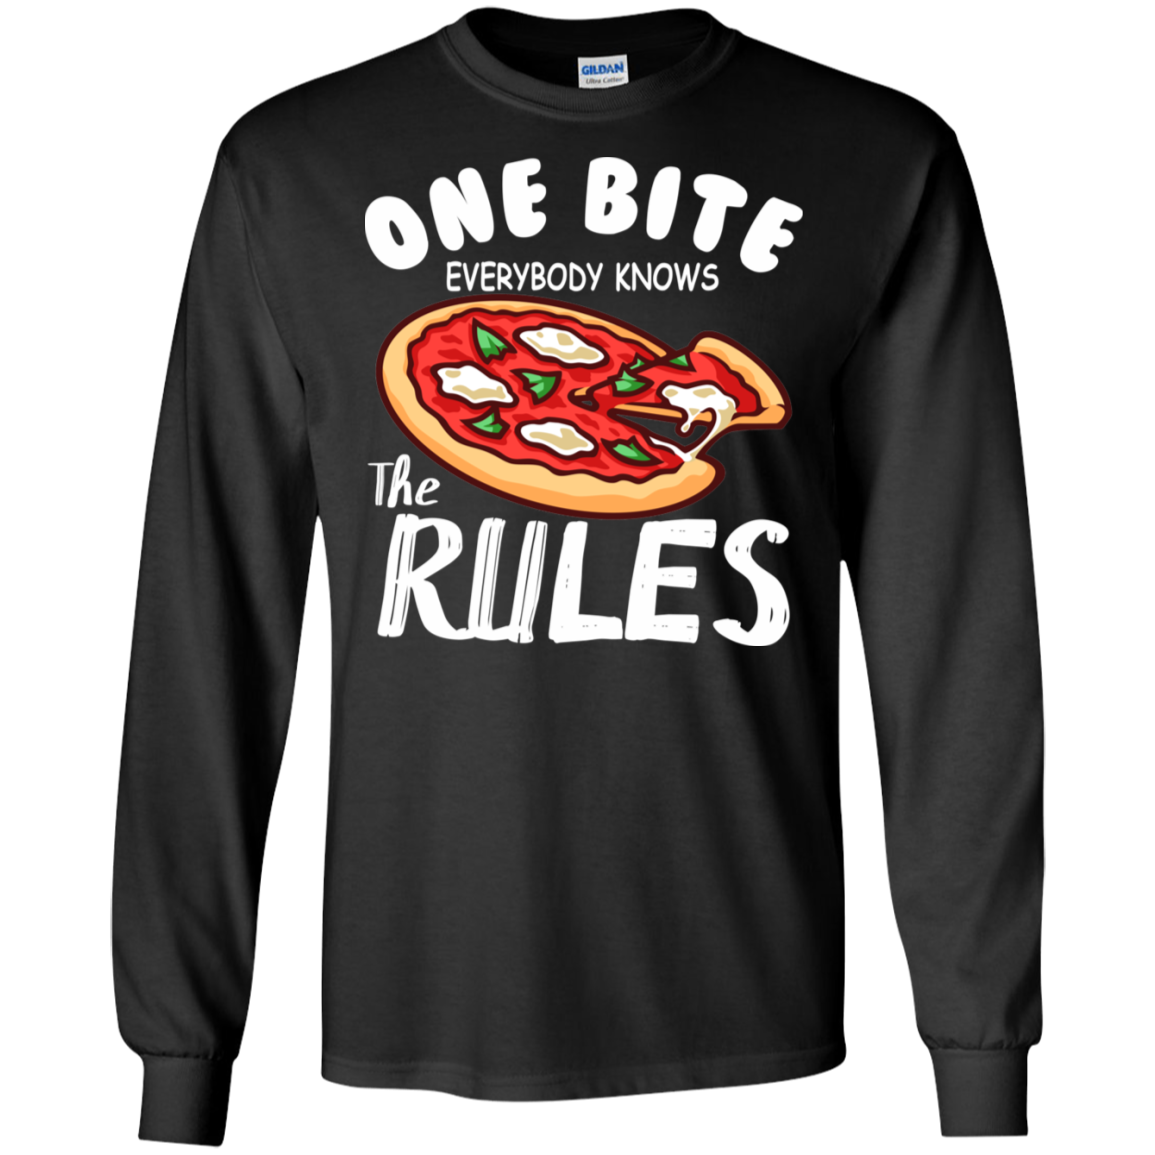 One bite everyone knows the rules